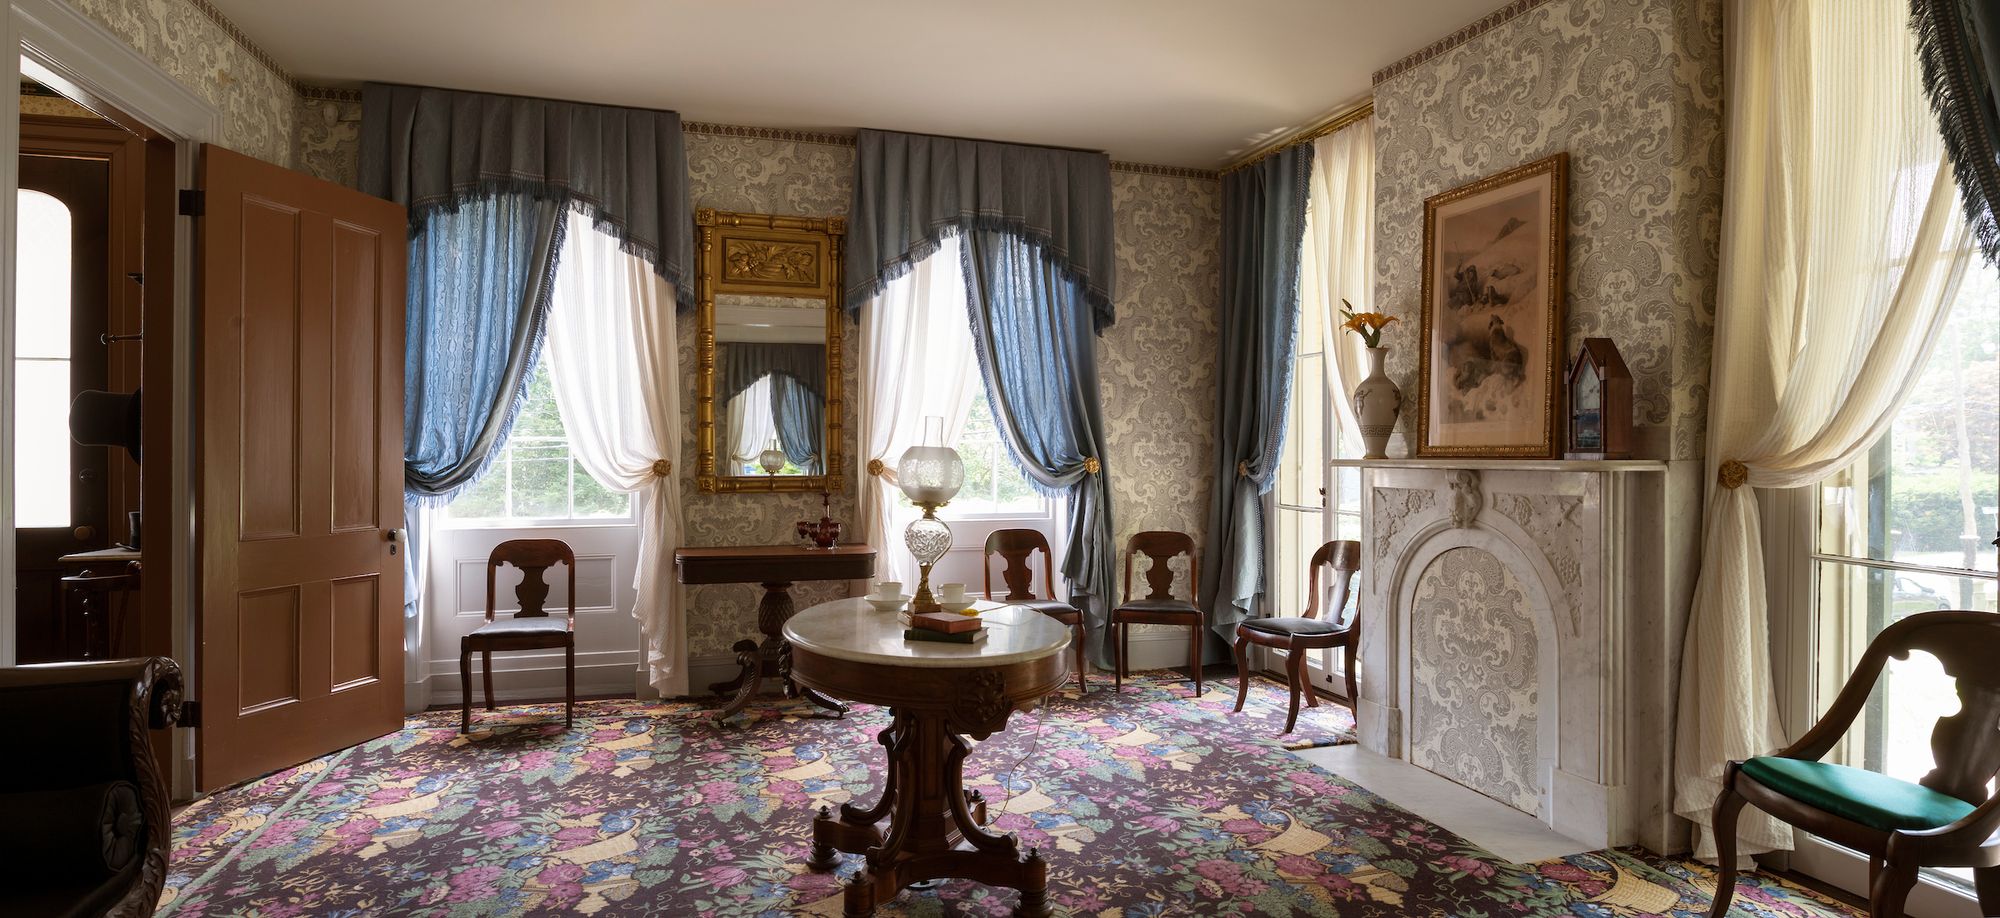 South-Parlor-Ultra-Wide--Credit_Jon-Crispin--Courtesy-of-the-Emily-Dickinson-Museum-.jpg